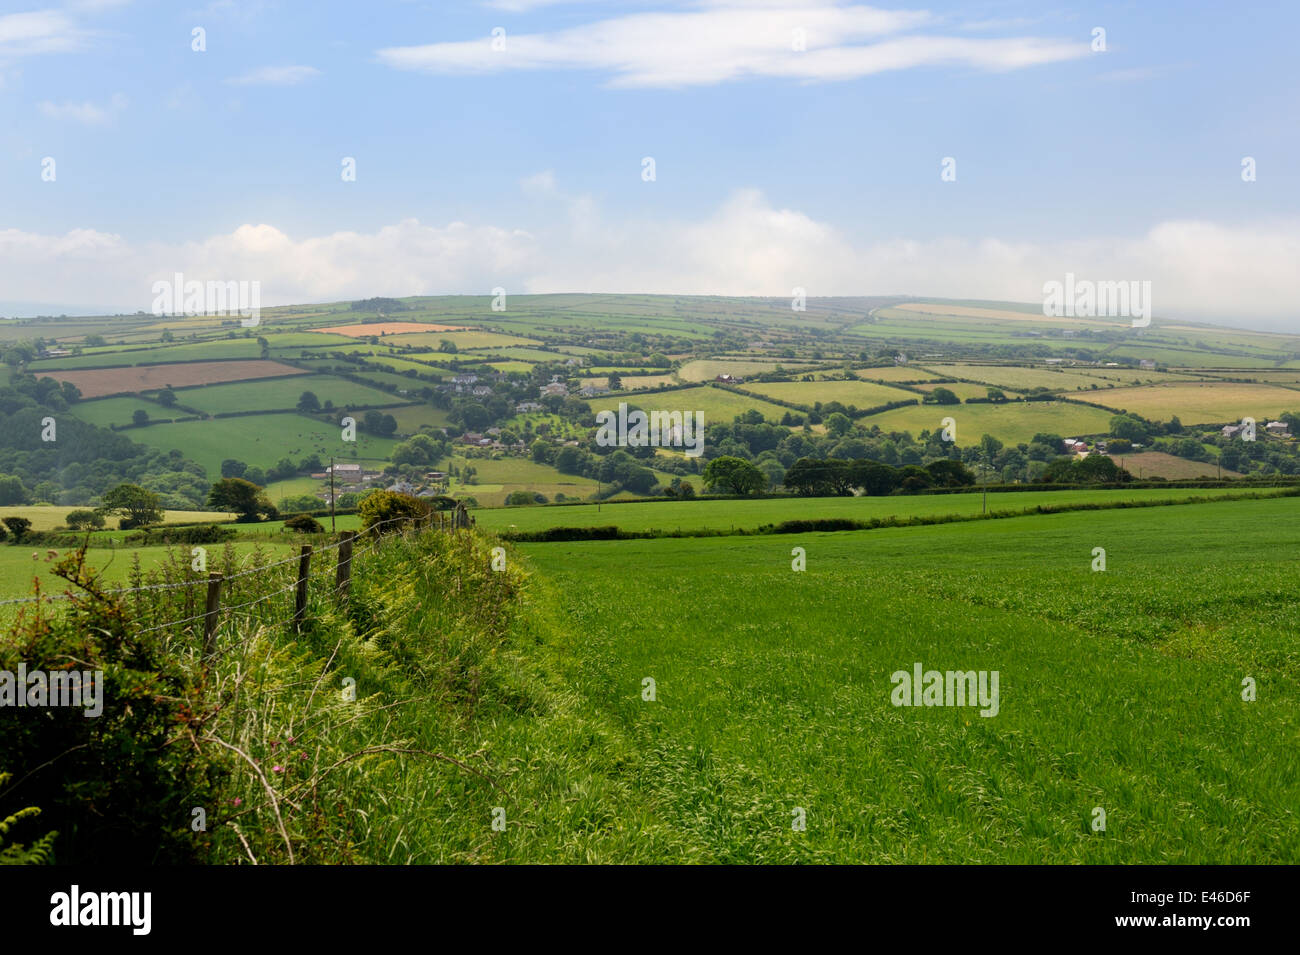 Wales countryside with grass ready for harvesting and patchwork fields in distance, Pembrokeshire, UK Stock Photo